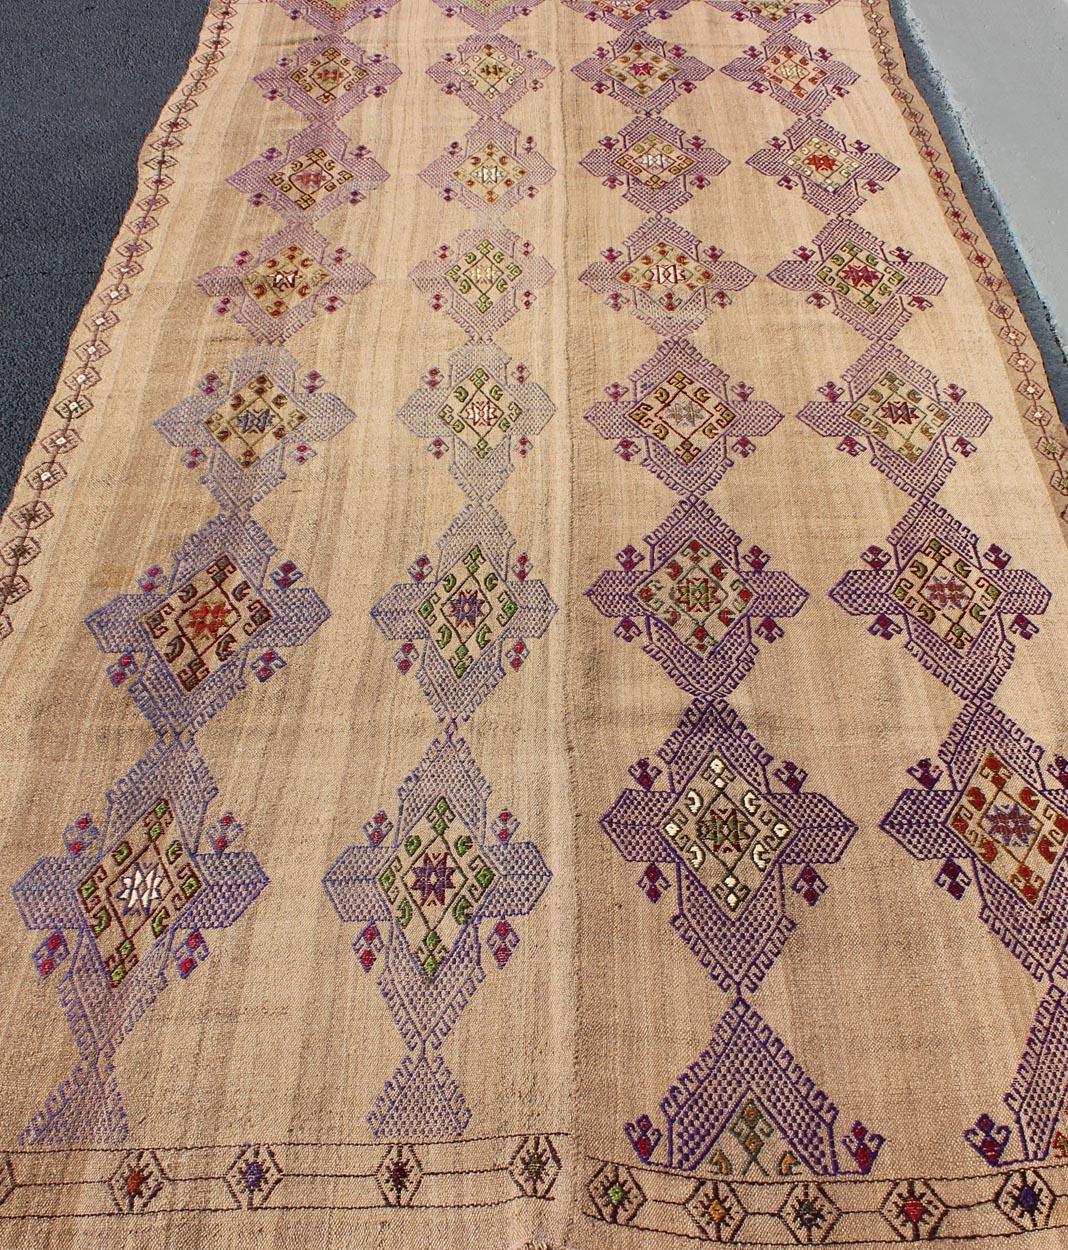 Turkish Kilim Hand Woven Embroidered Purple Diamonds on a Tan Background For Sale 1